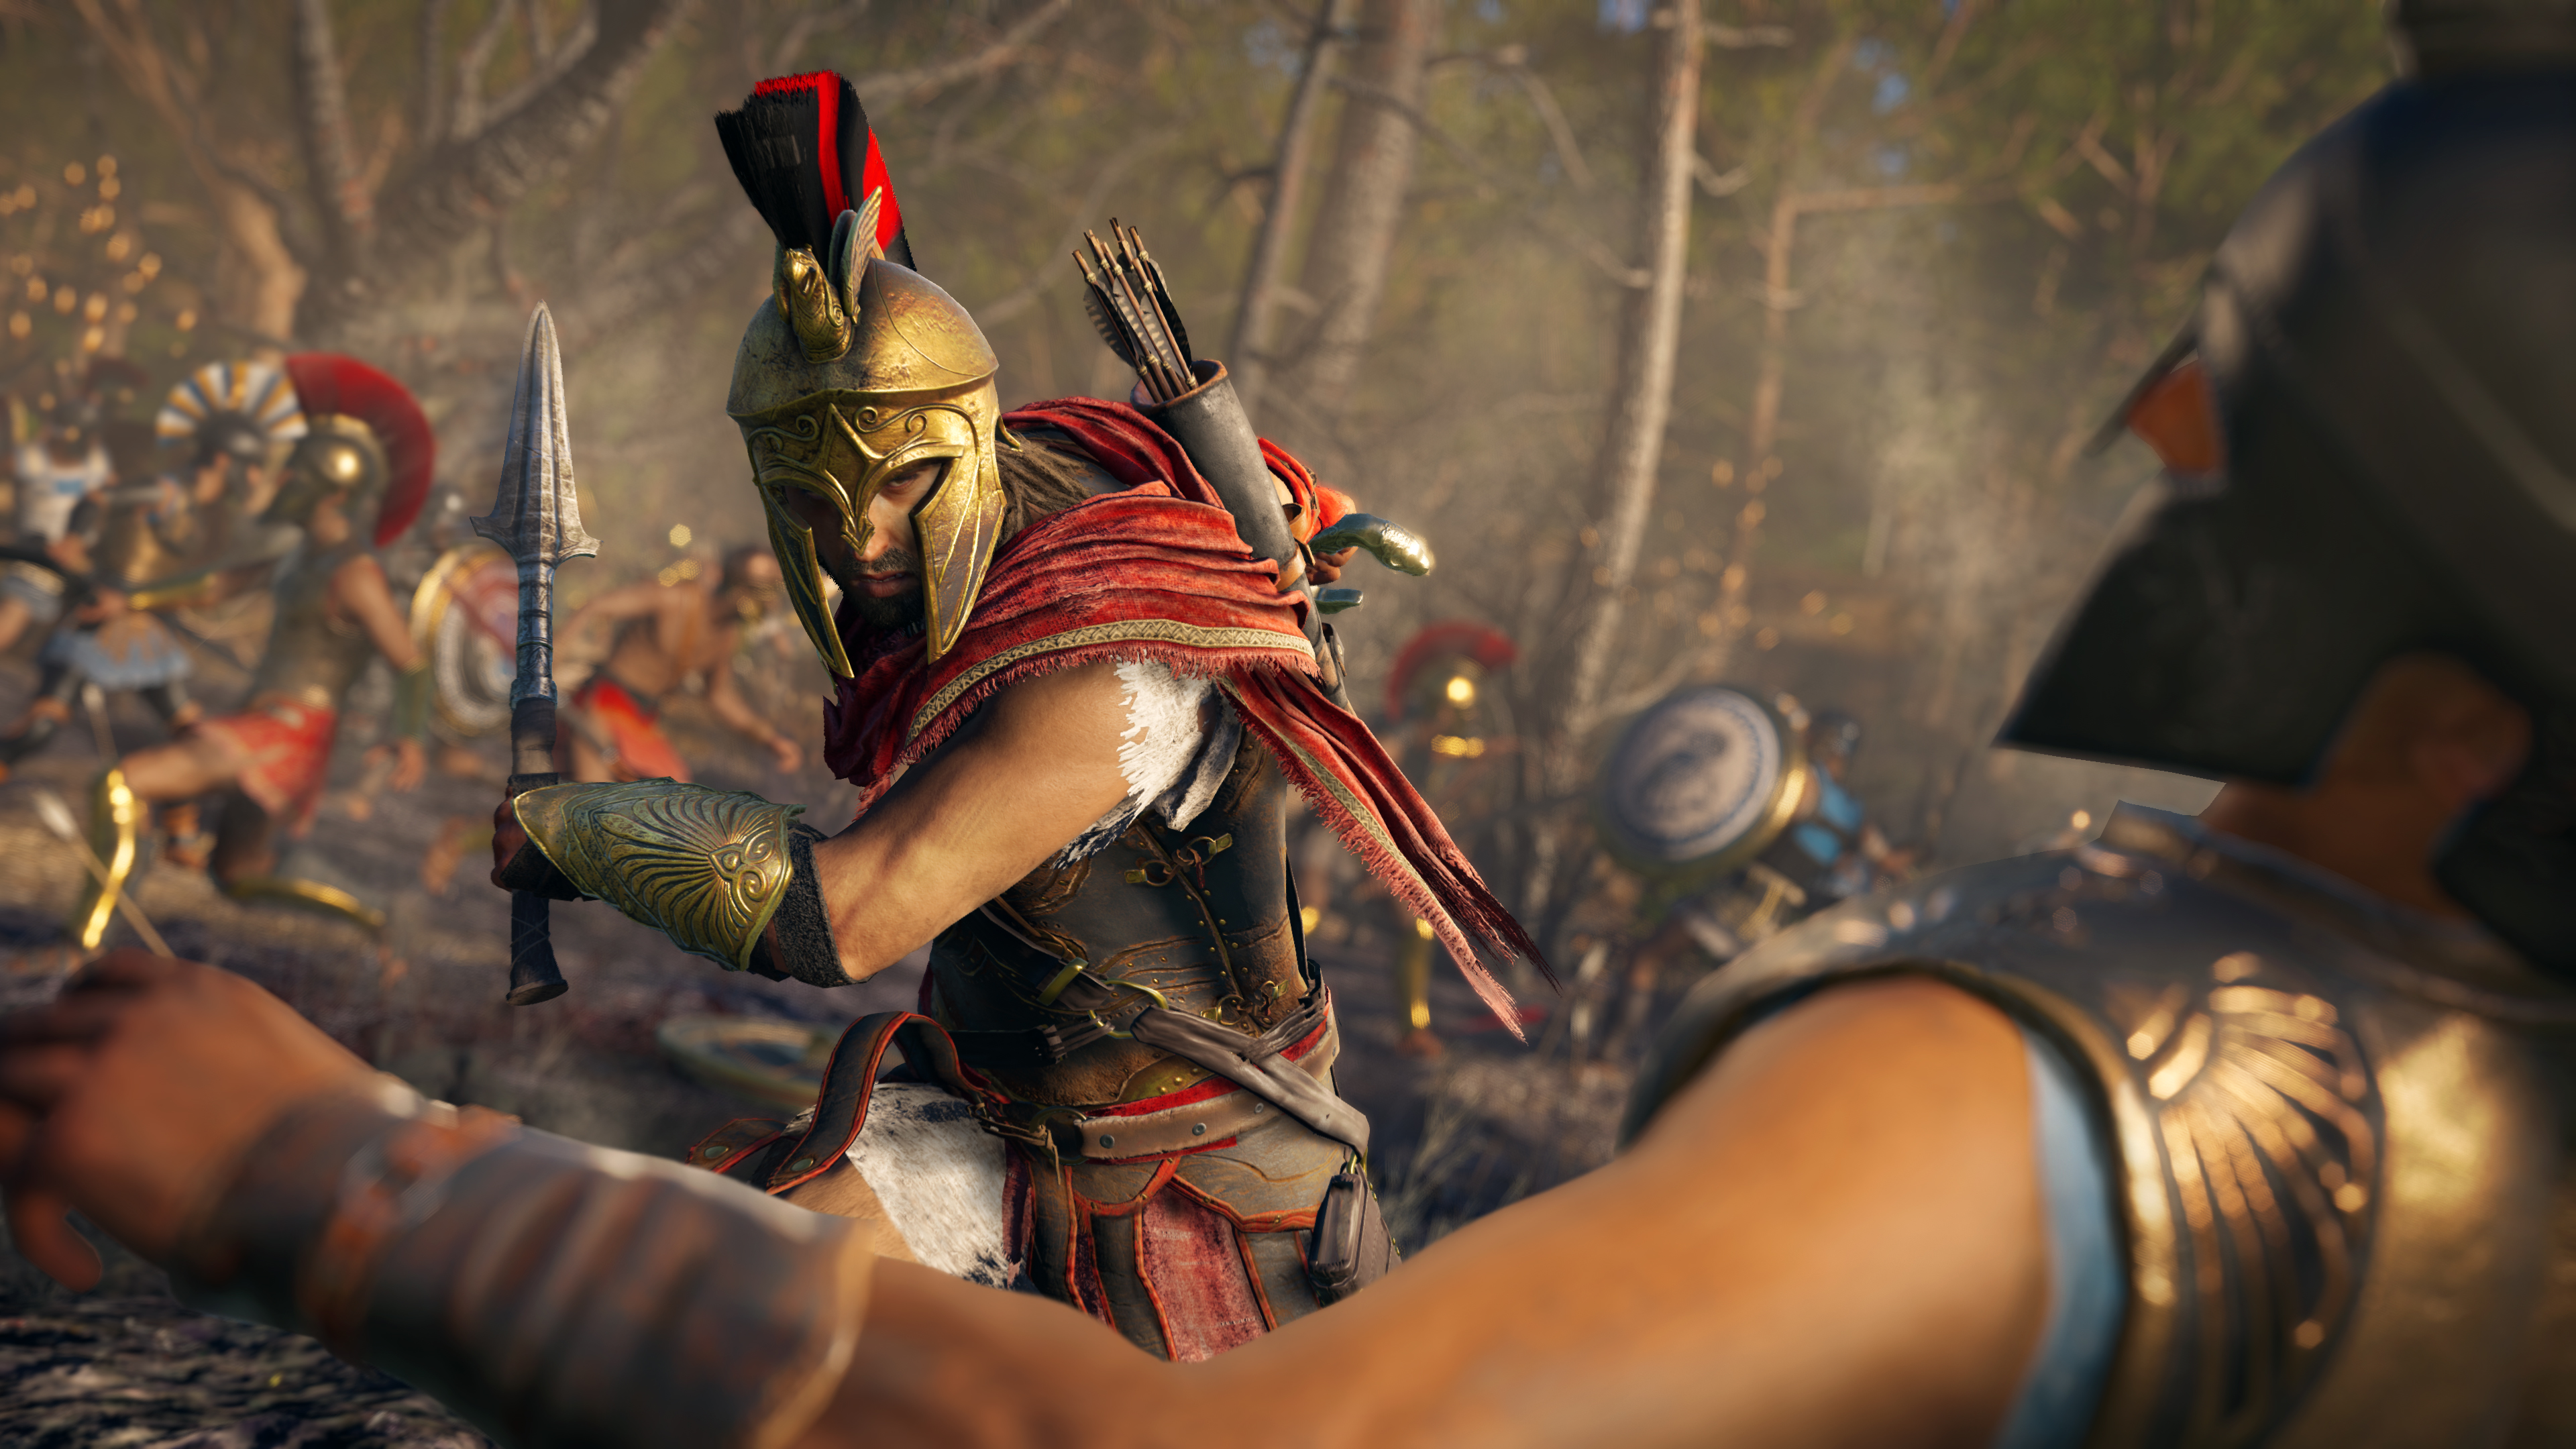 Assassin's Creed Odyssey Lakonia: how to complete the side quests